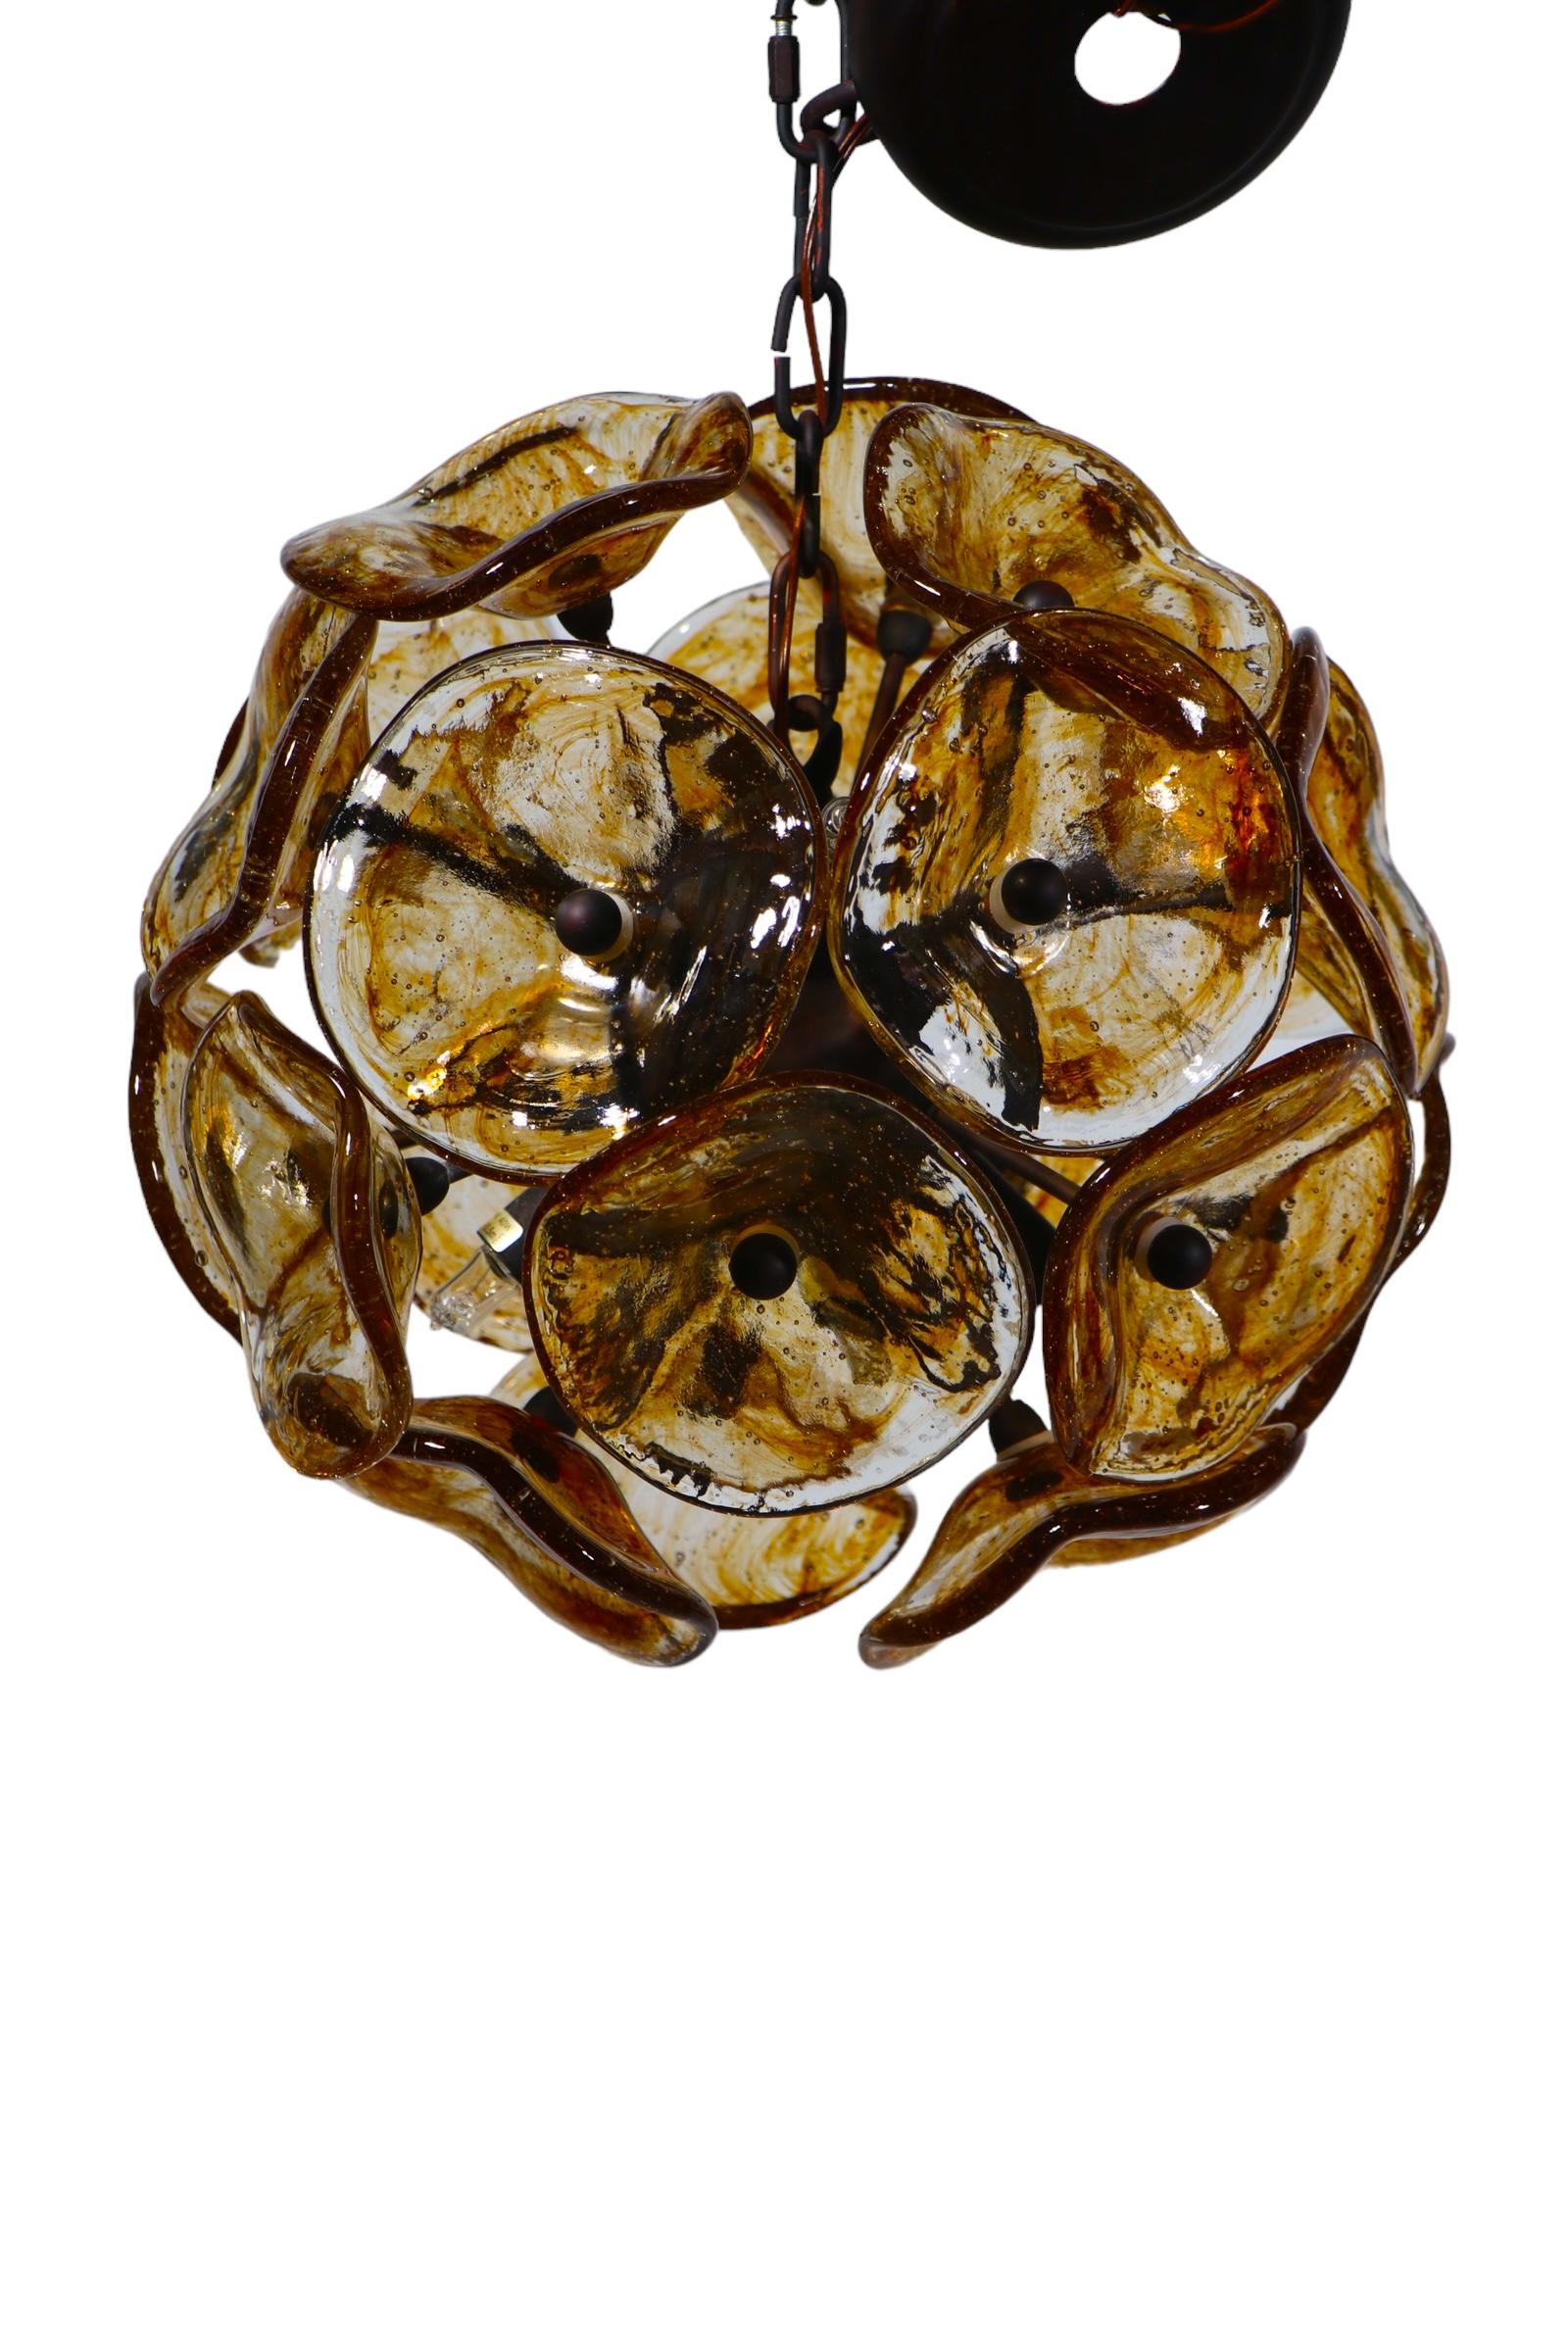 Metal Post Modern Chandelier with Murano Glass Flowers by Fiori c 1990 -2010 For Sale